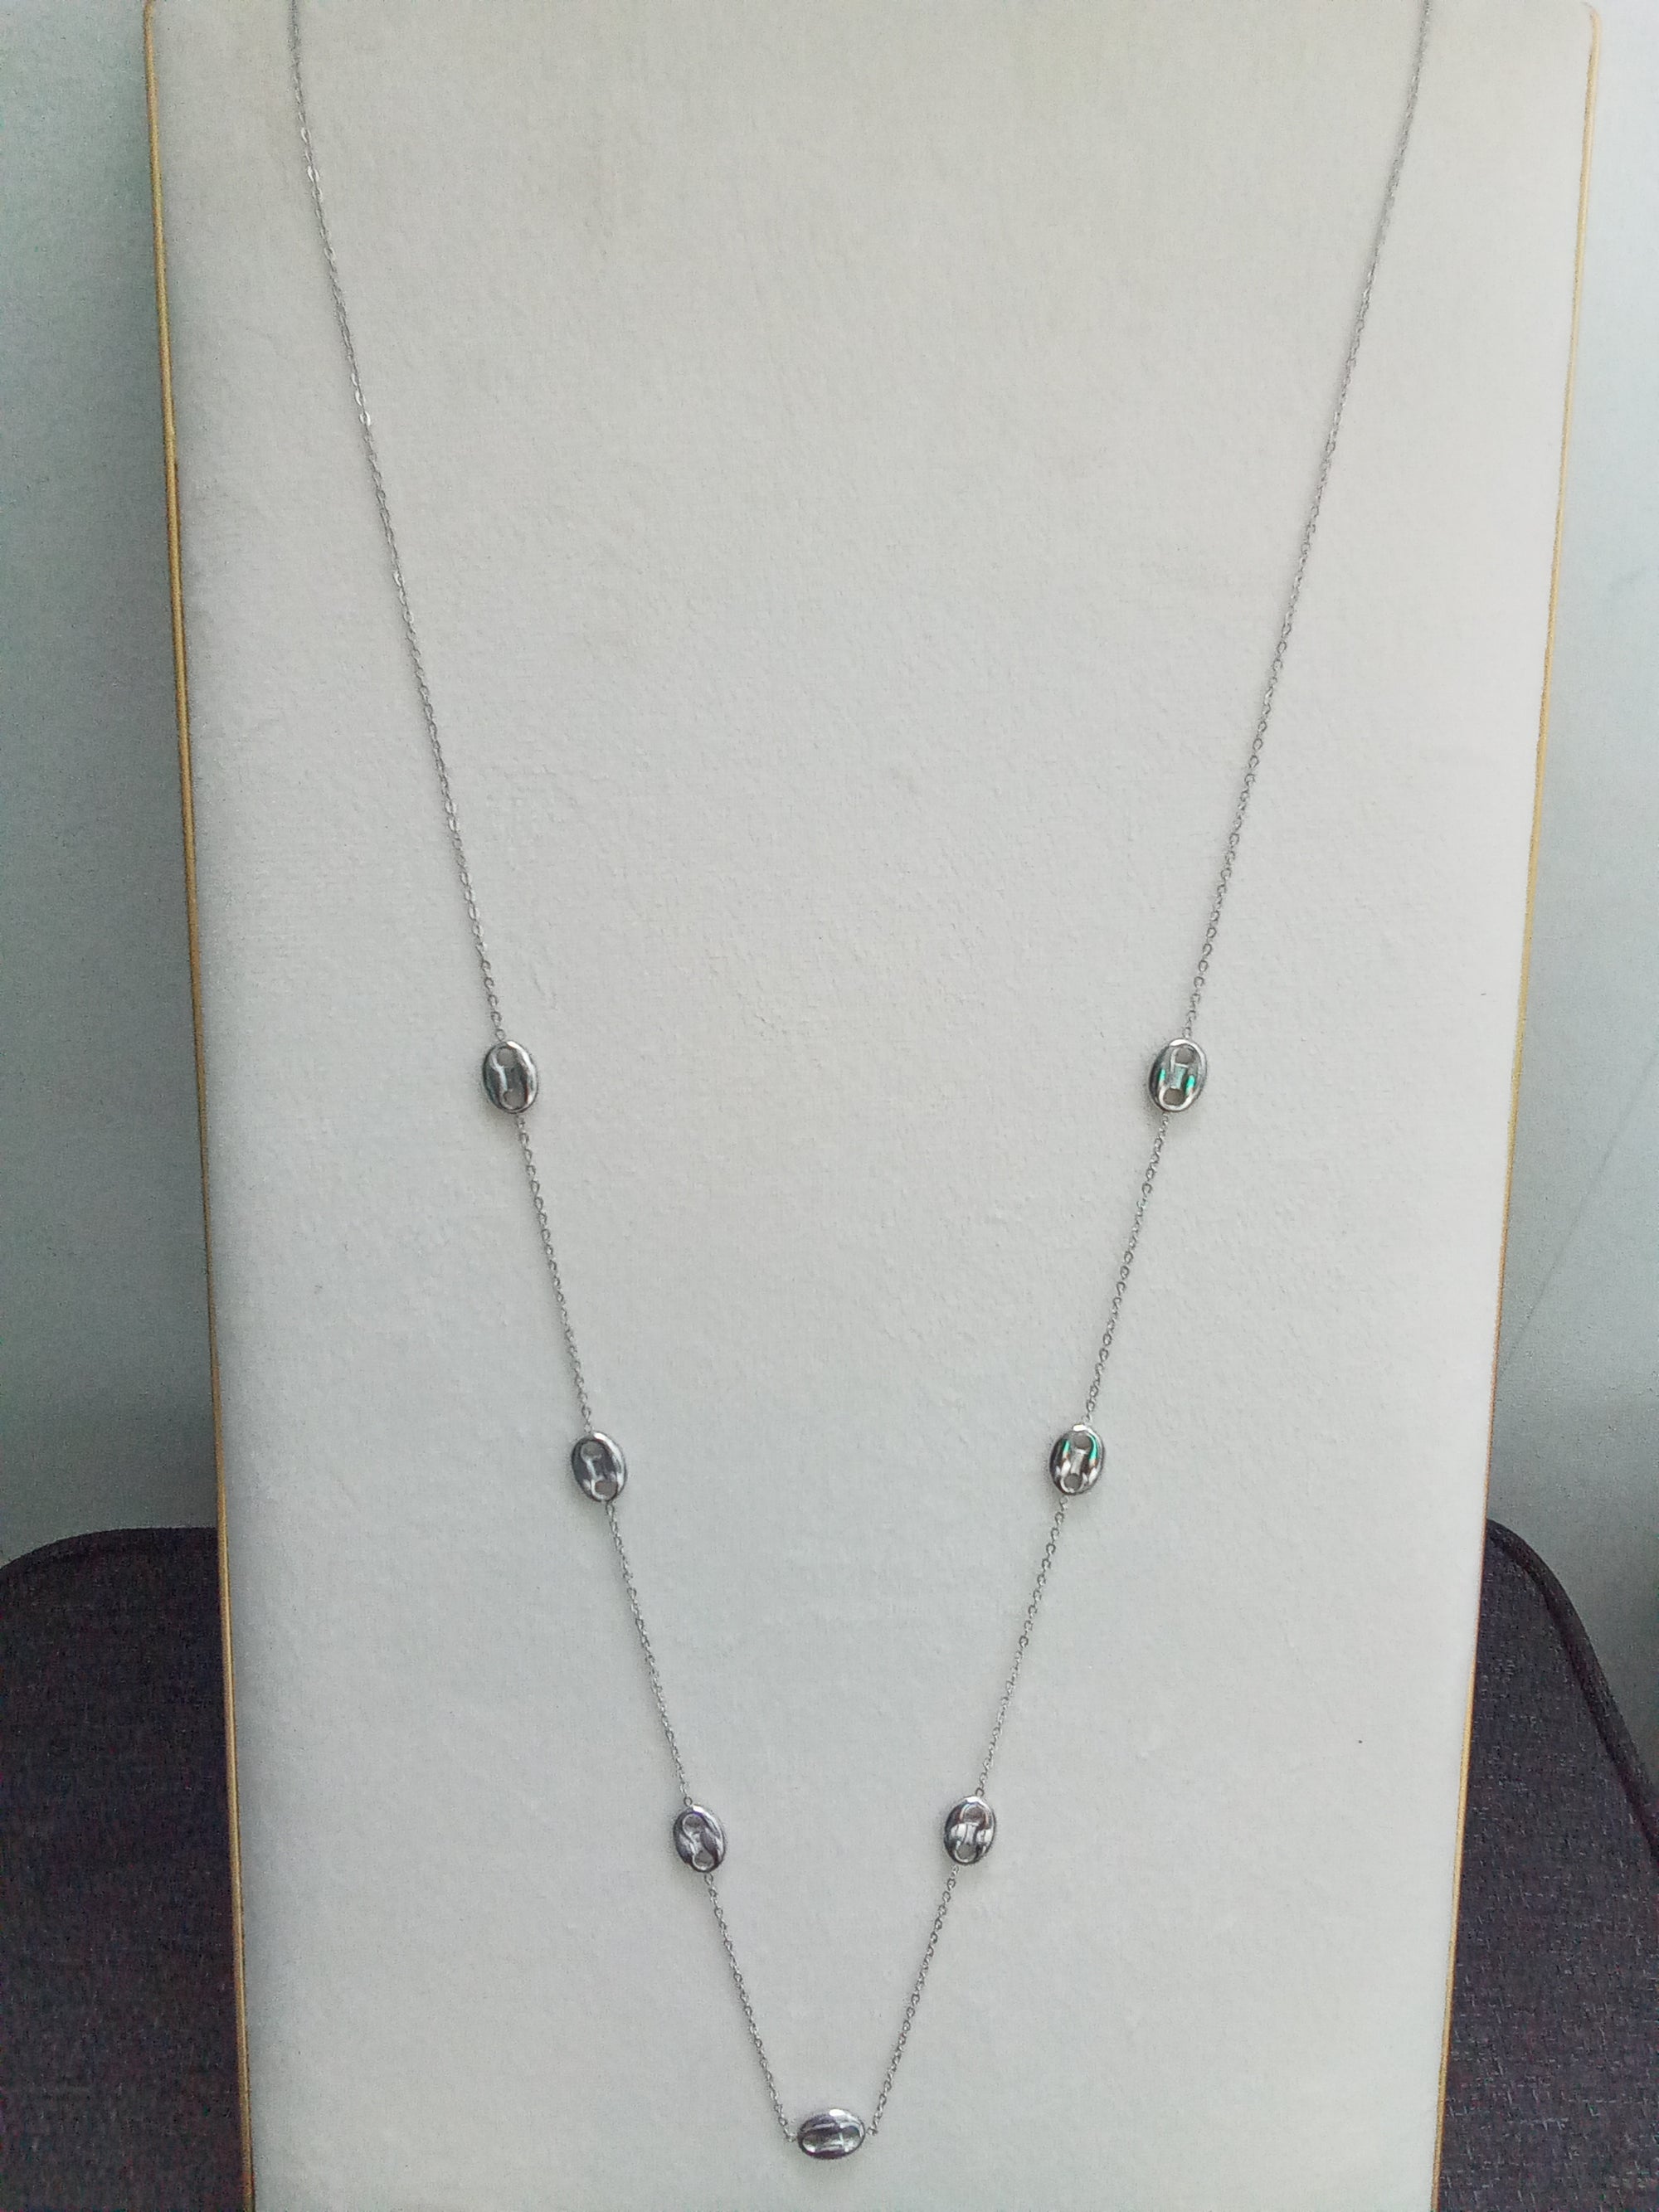 Stainless Steel “Coffee Bean” Long Necklace